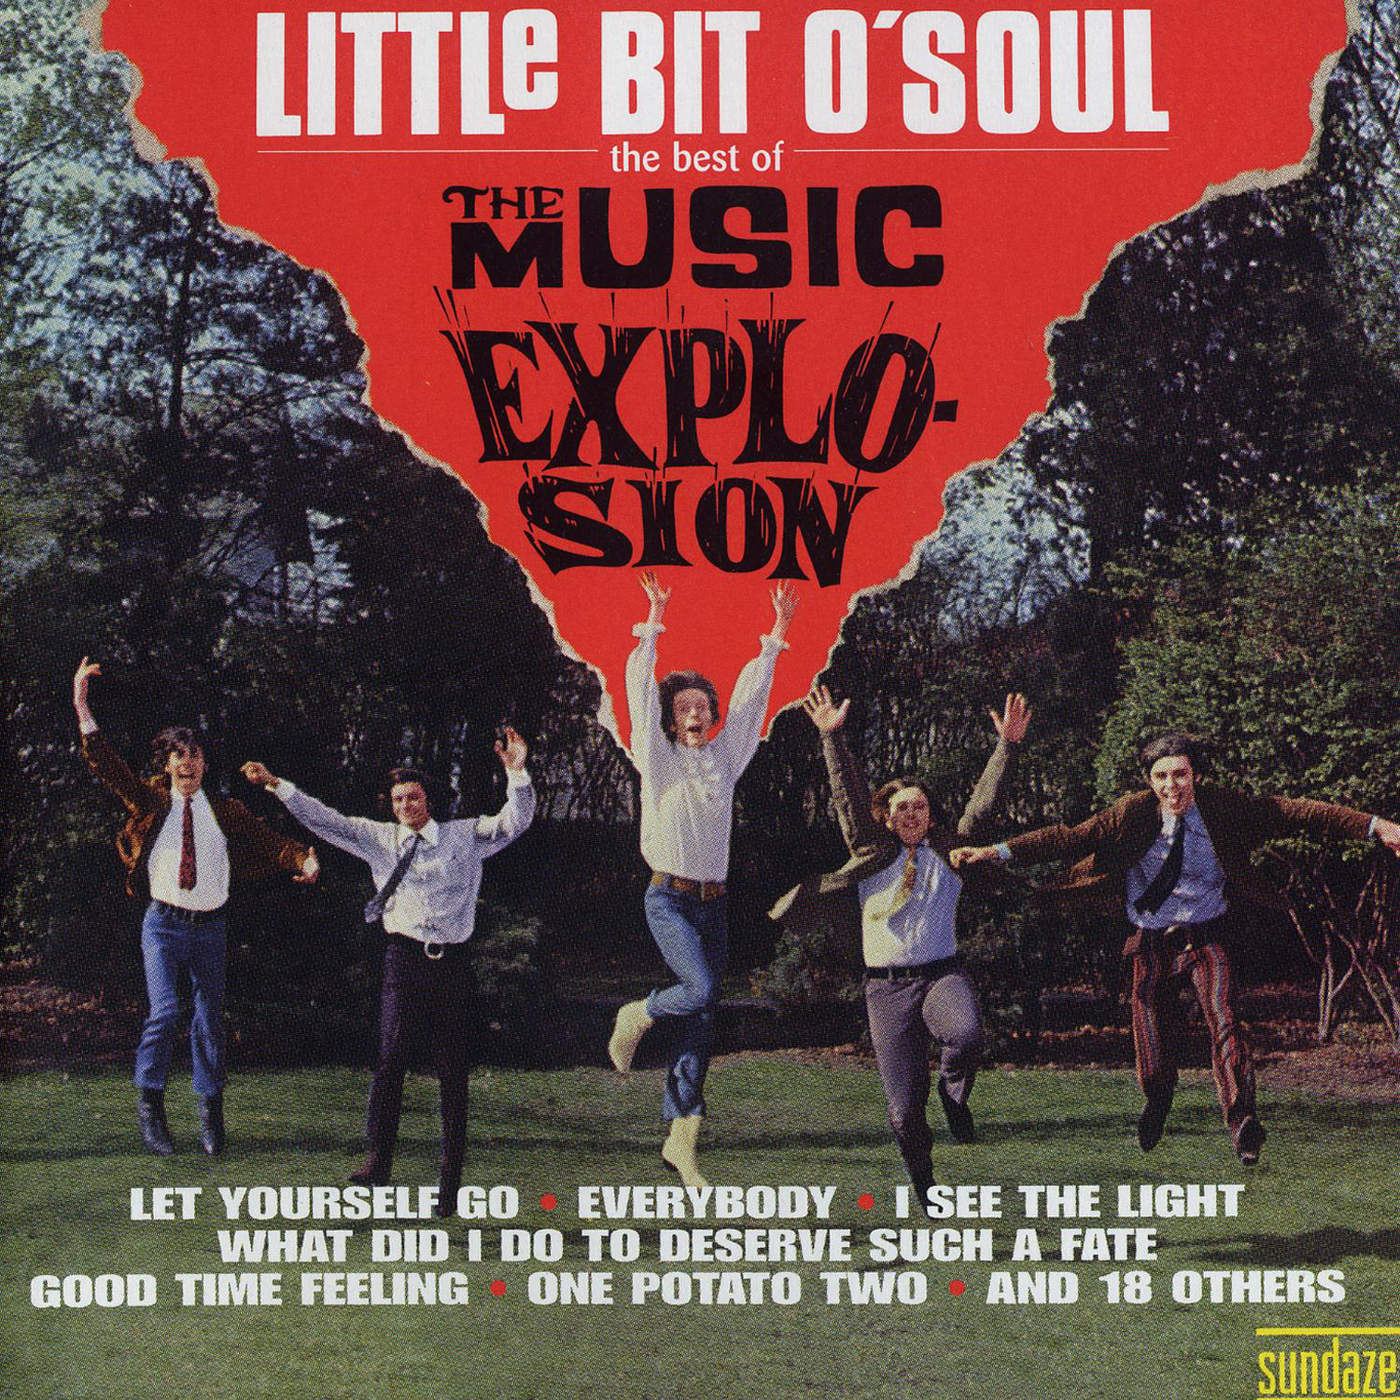 Art for Little Bit O'Soul by The Music Explosion